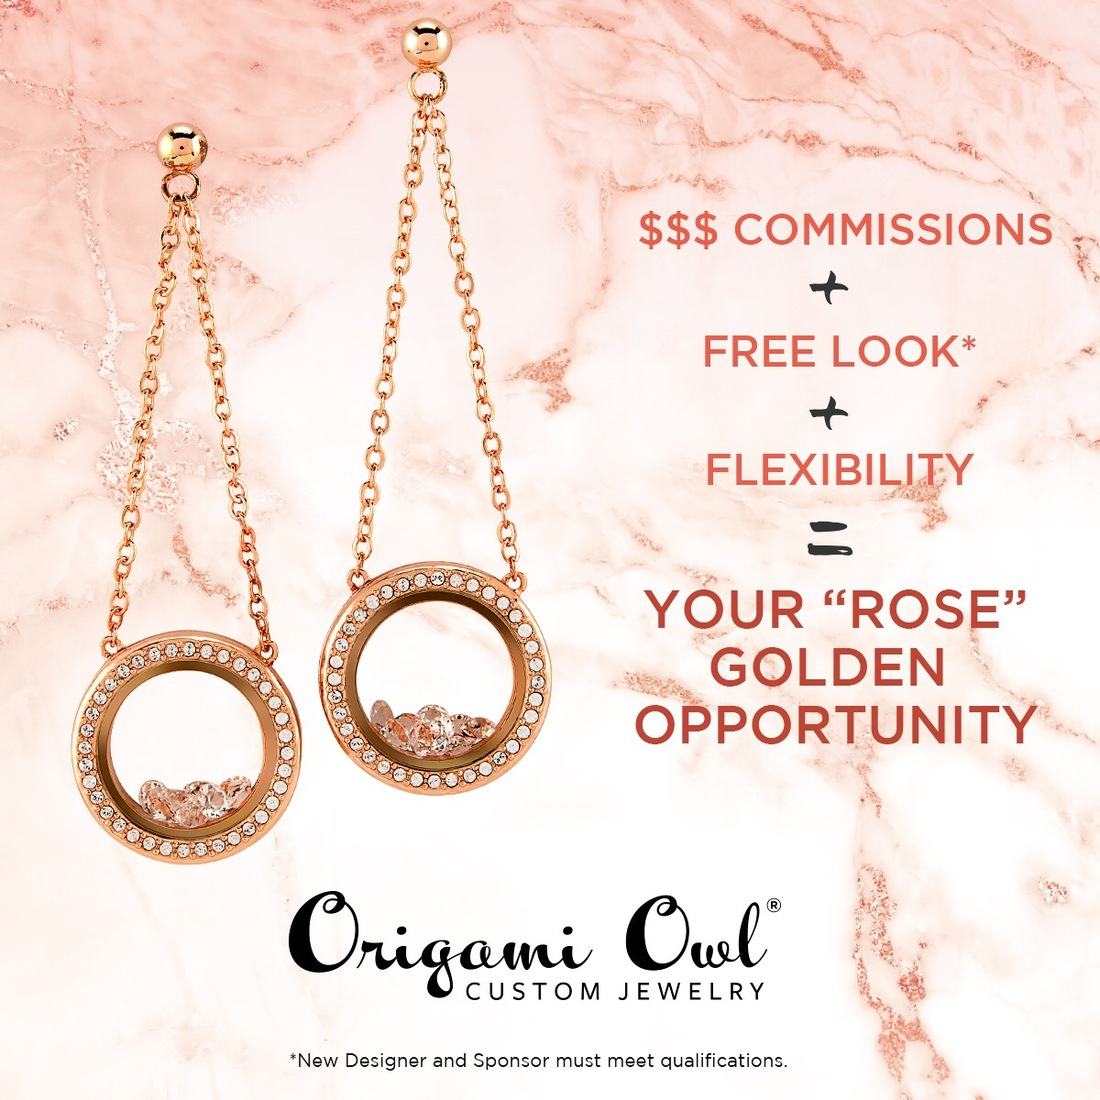 Origami Owl October Specials Origami Owl October Specials Direct Sales And Home Based Business